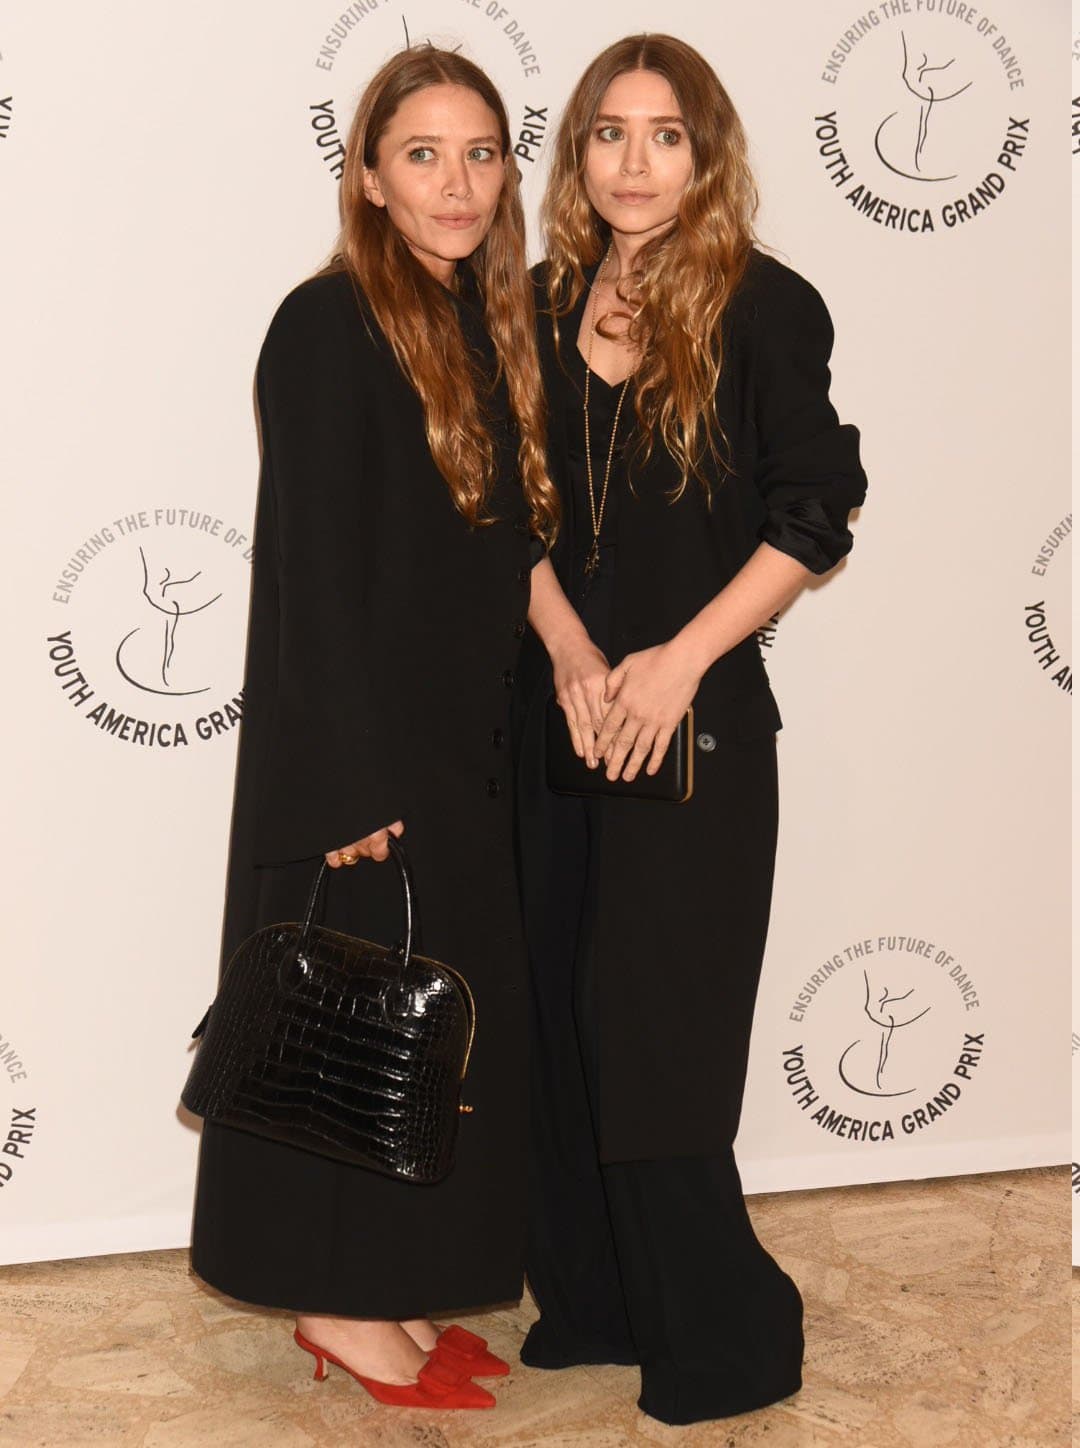 Twins Mary-Kate and Ashley Olsen have been in the film and TV industry since they're one and have founded fashion labels, The Row and Elizabeth & James